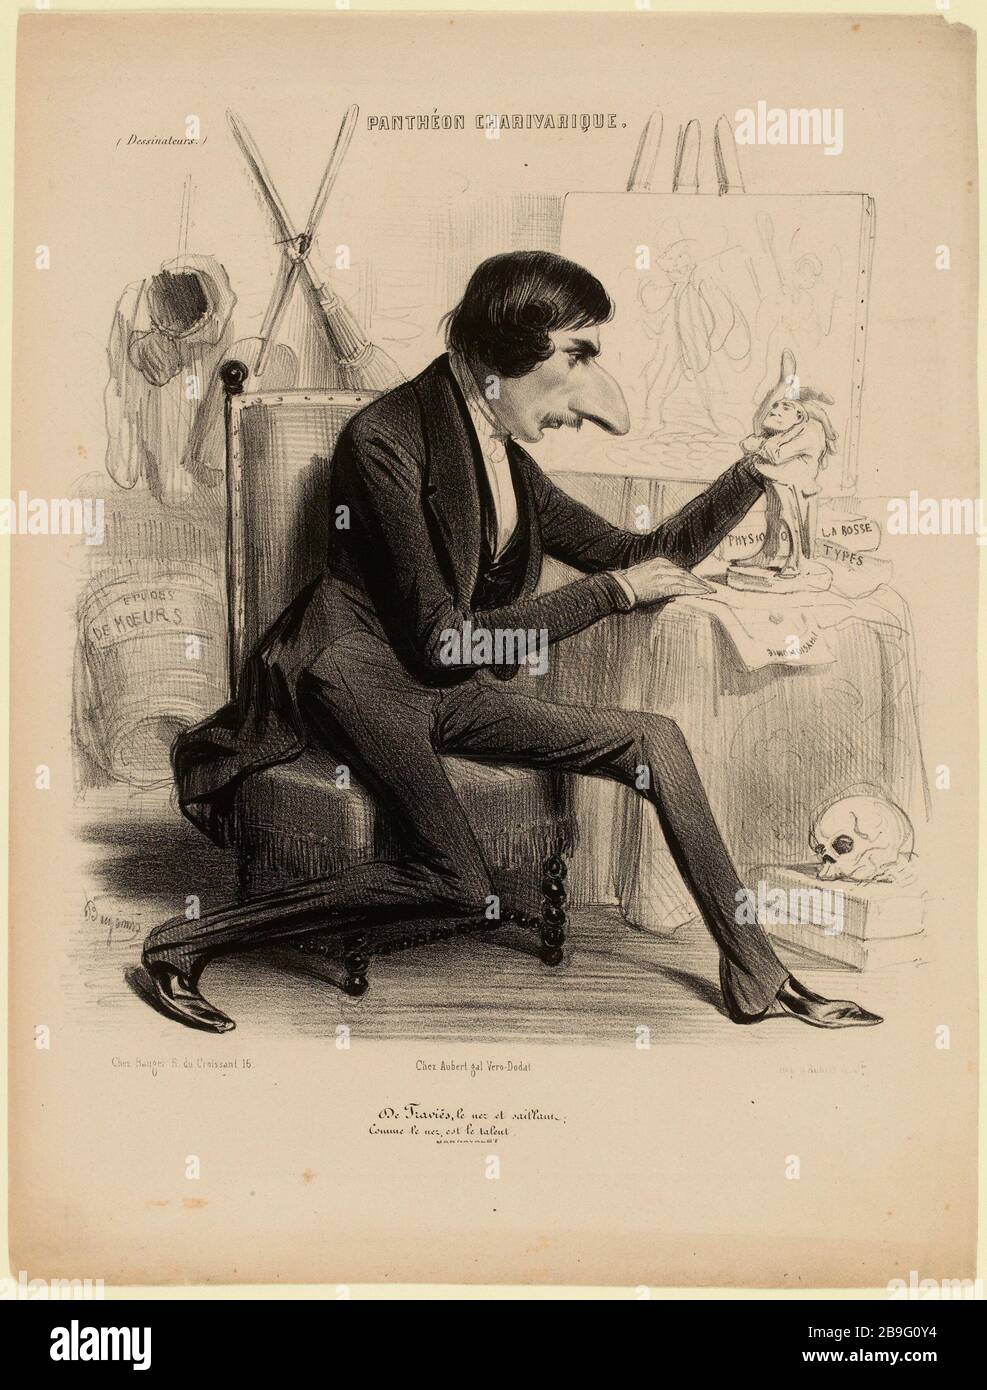 Travies of the nose is projecting; / Like the nose is the talent (as registered) |. Charles Joseph Traviès of Villers (1804-1859) (dummy title) |. PANTHEON CHARIVARIQUE, Nº64 (as a whole). Stock Photo